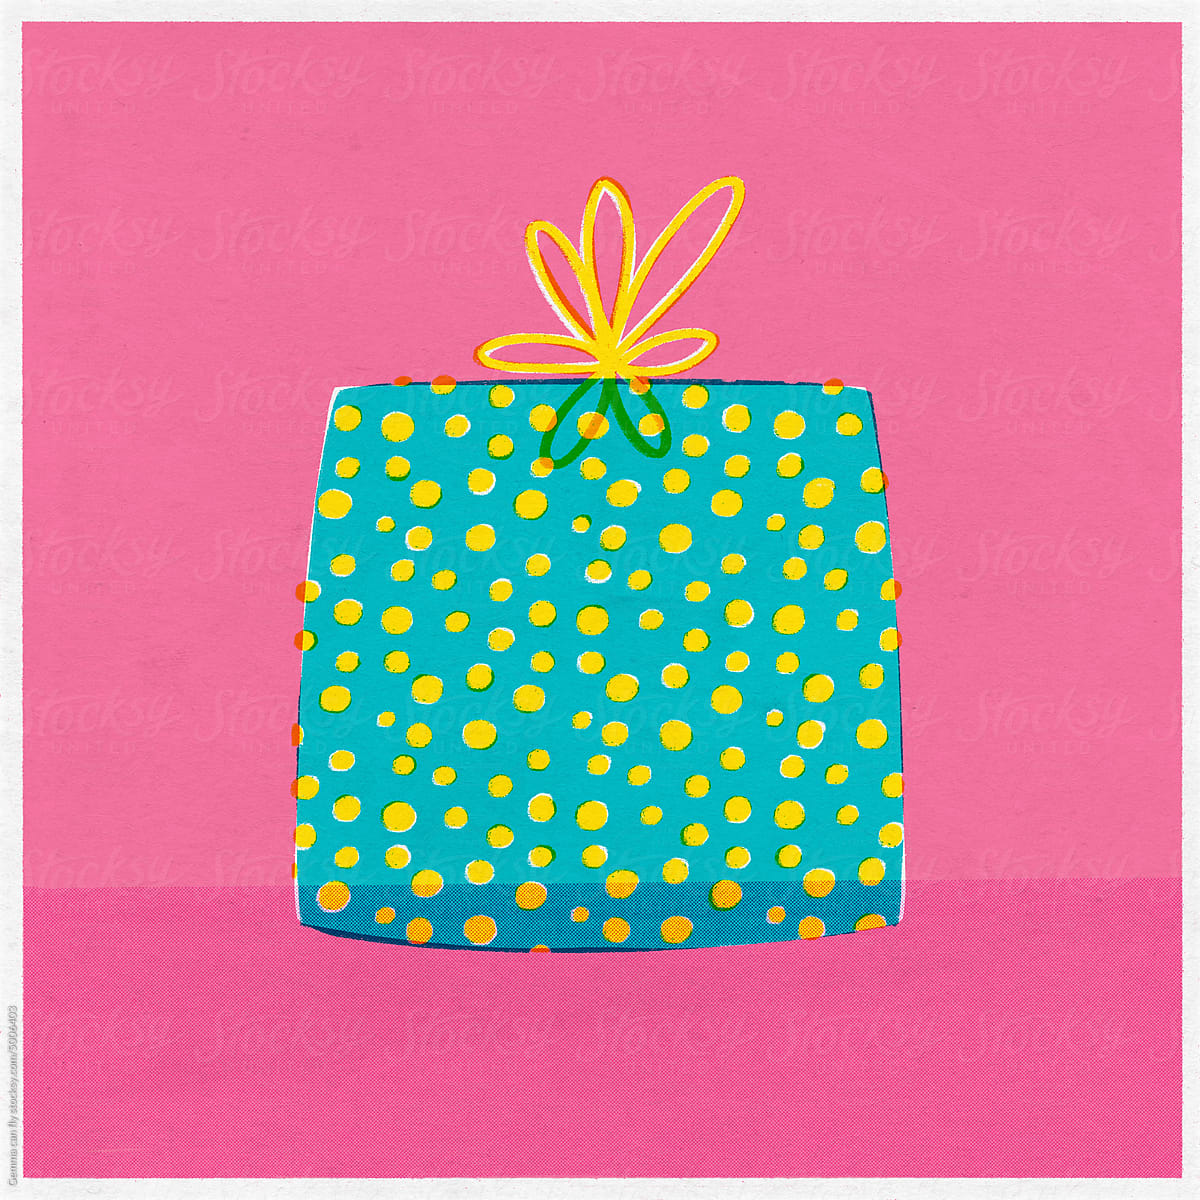 Retro gift with a bow. Minimal concept illustration